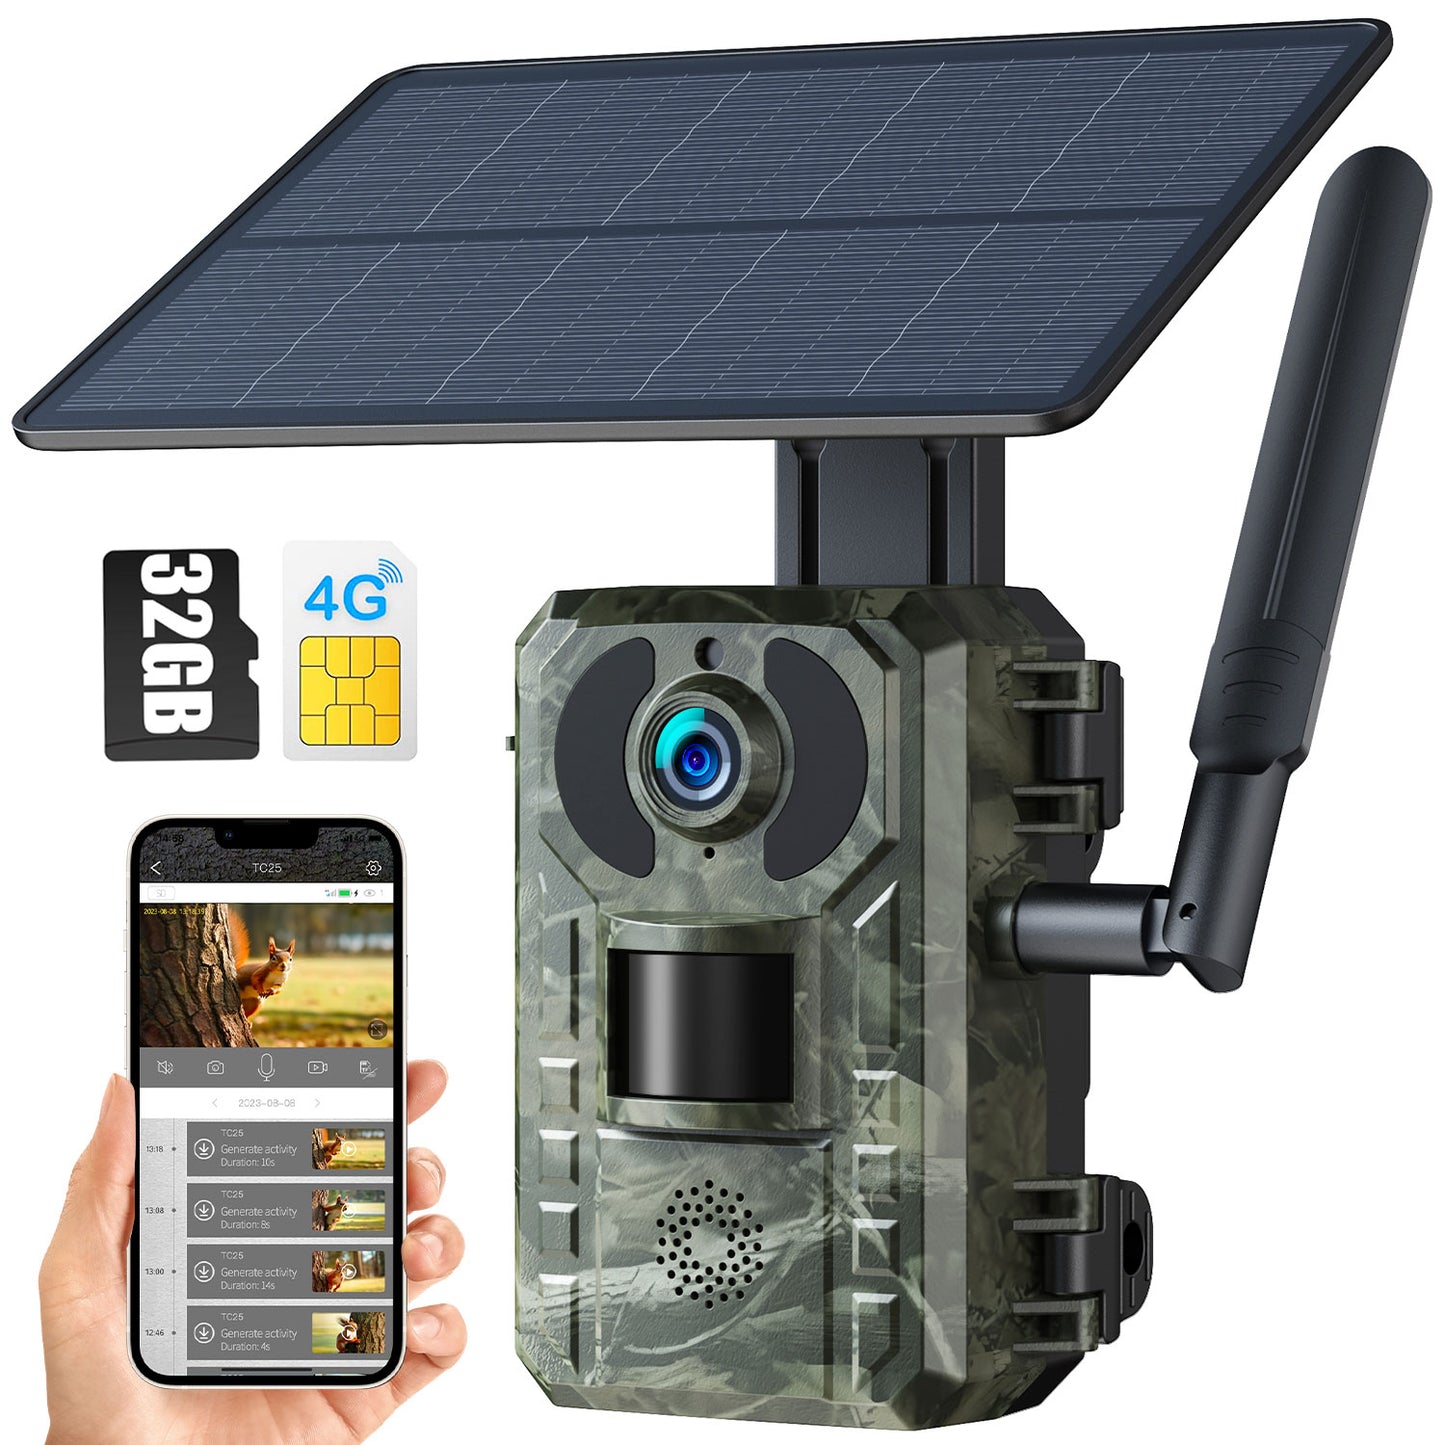 CAMPARK 4G Cellular Solar Trail Camera with SD Card, 2.5K 14MP Hunting Game Camera with Live View and Motion Alerts, 940nm No Glow Night Vision and IP66 Waterproof for Wildlife Monitoring